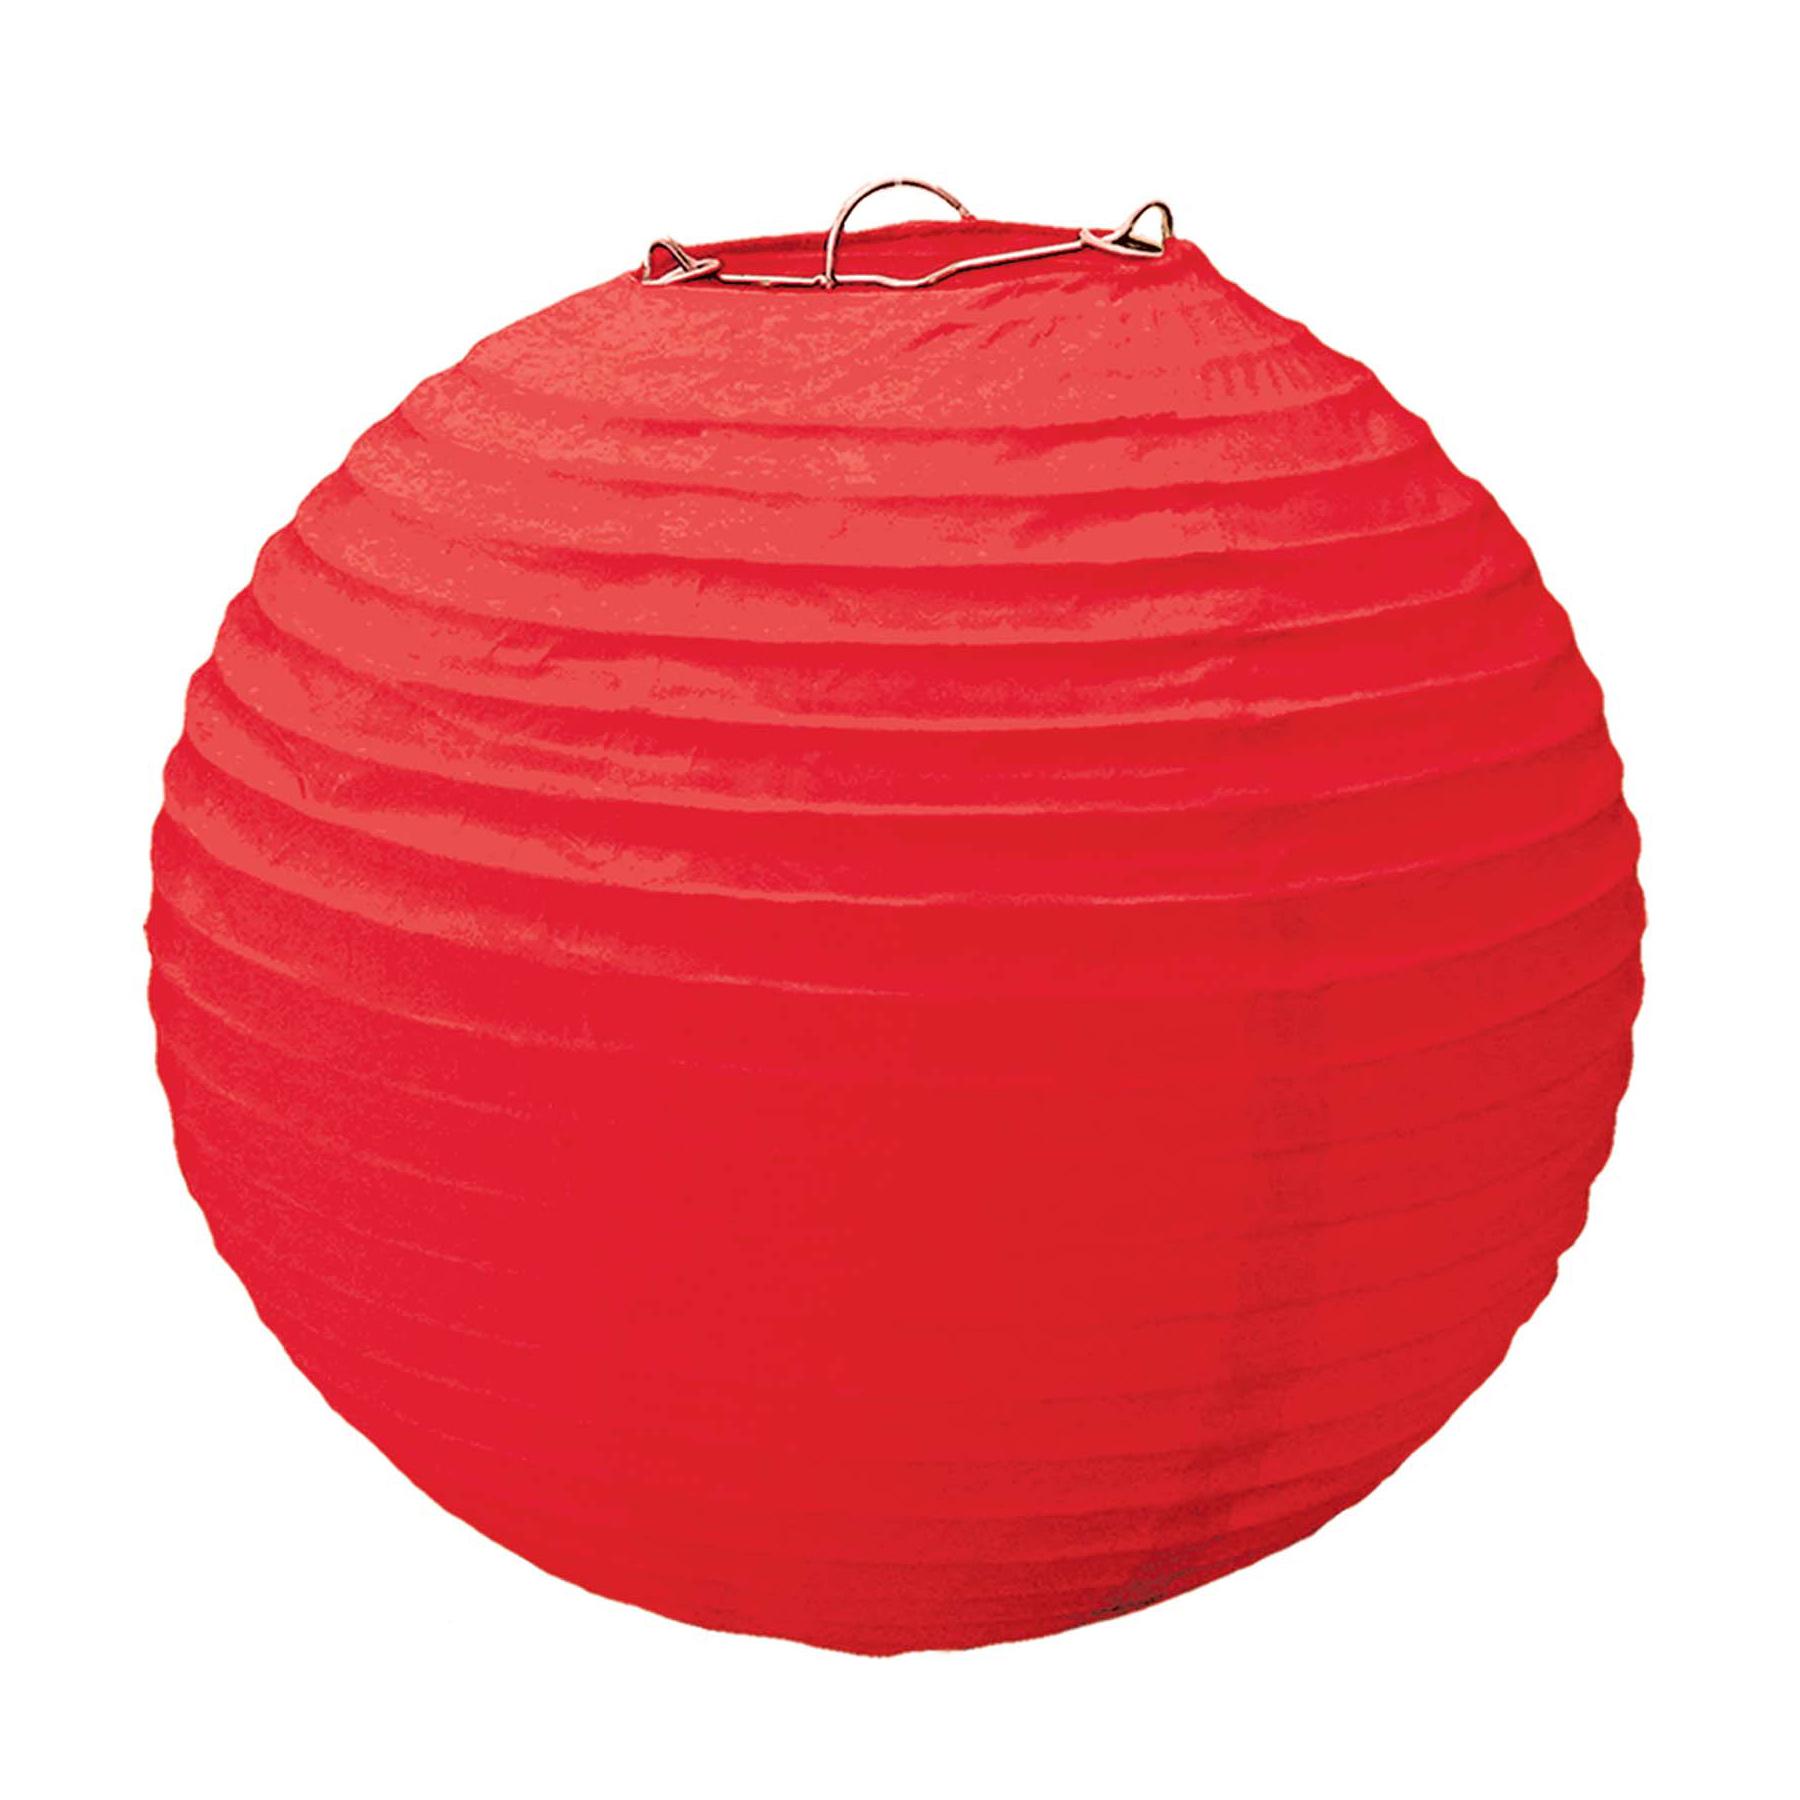 Apple Red Round Paper Lanterns 9.50in 3pcs Decorations - Party Centre